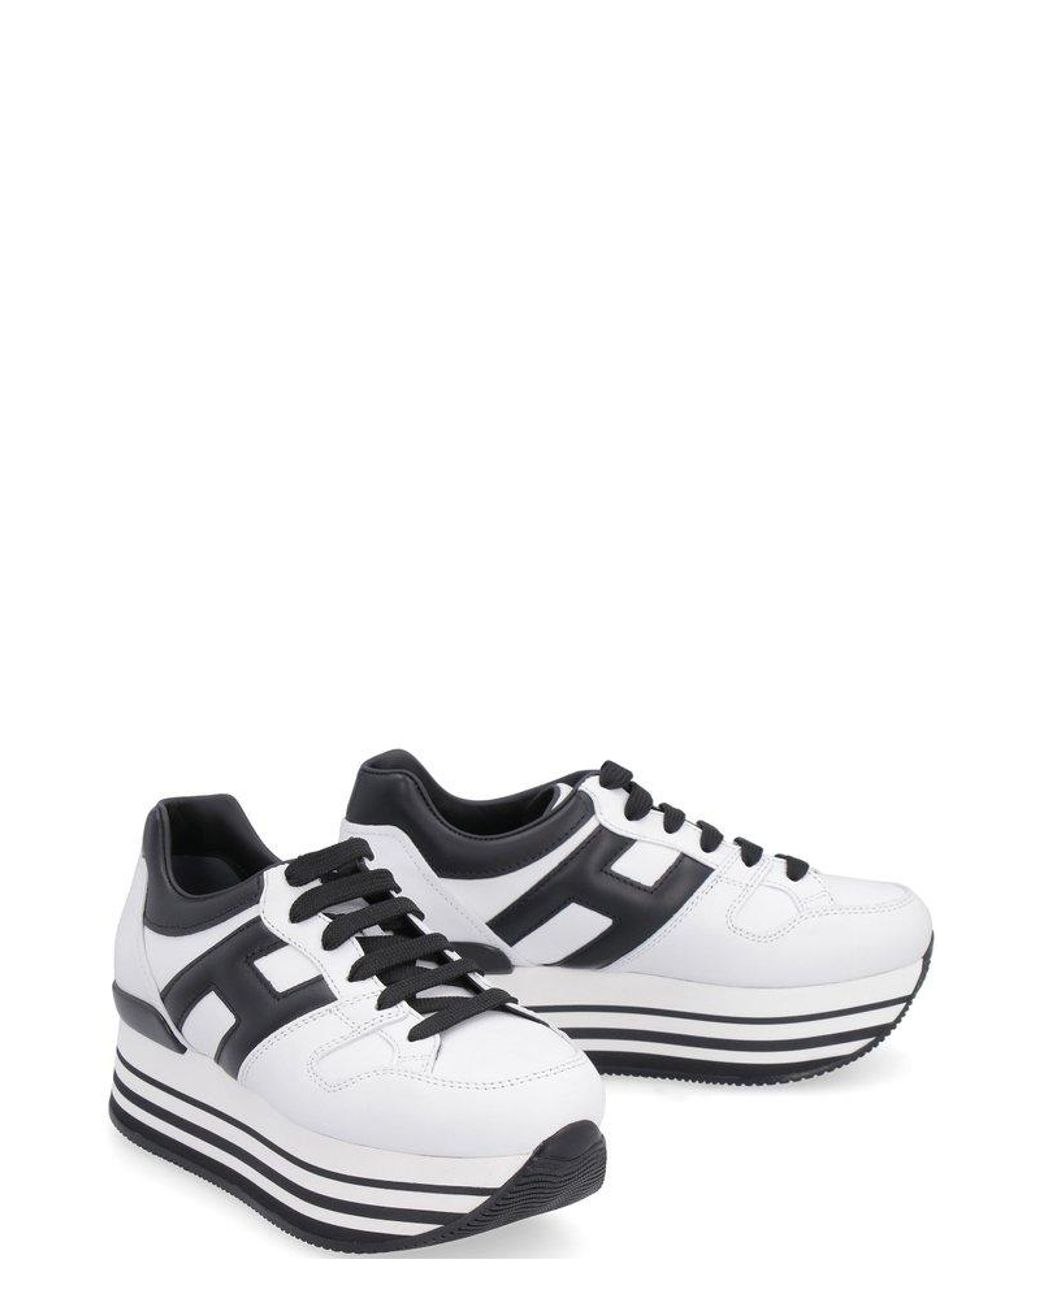 Hogan Leather Platform Sneakers in White | Lyst